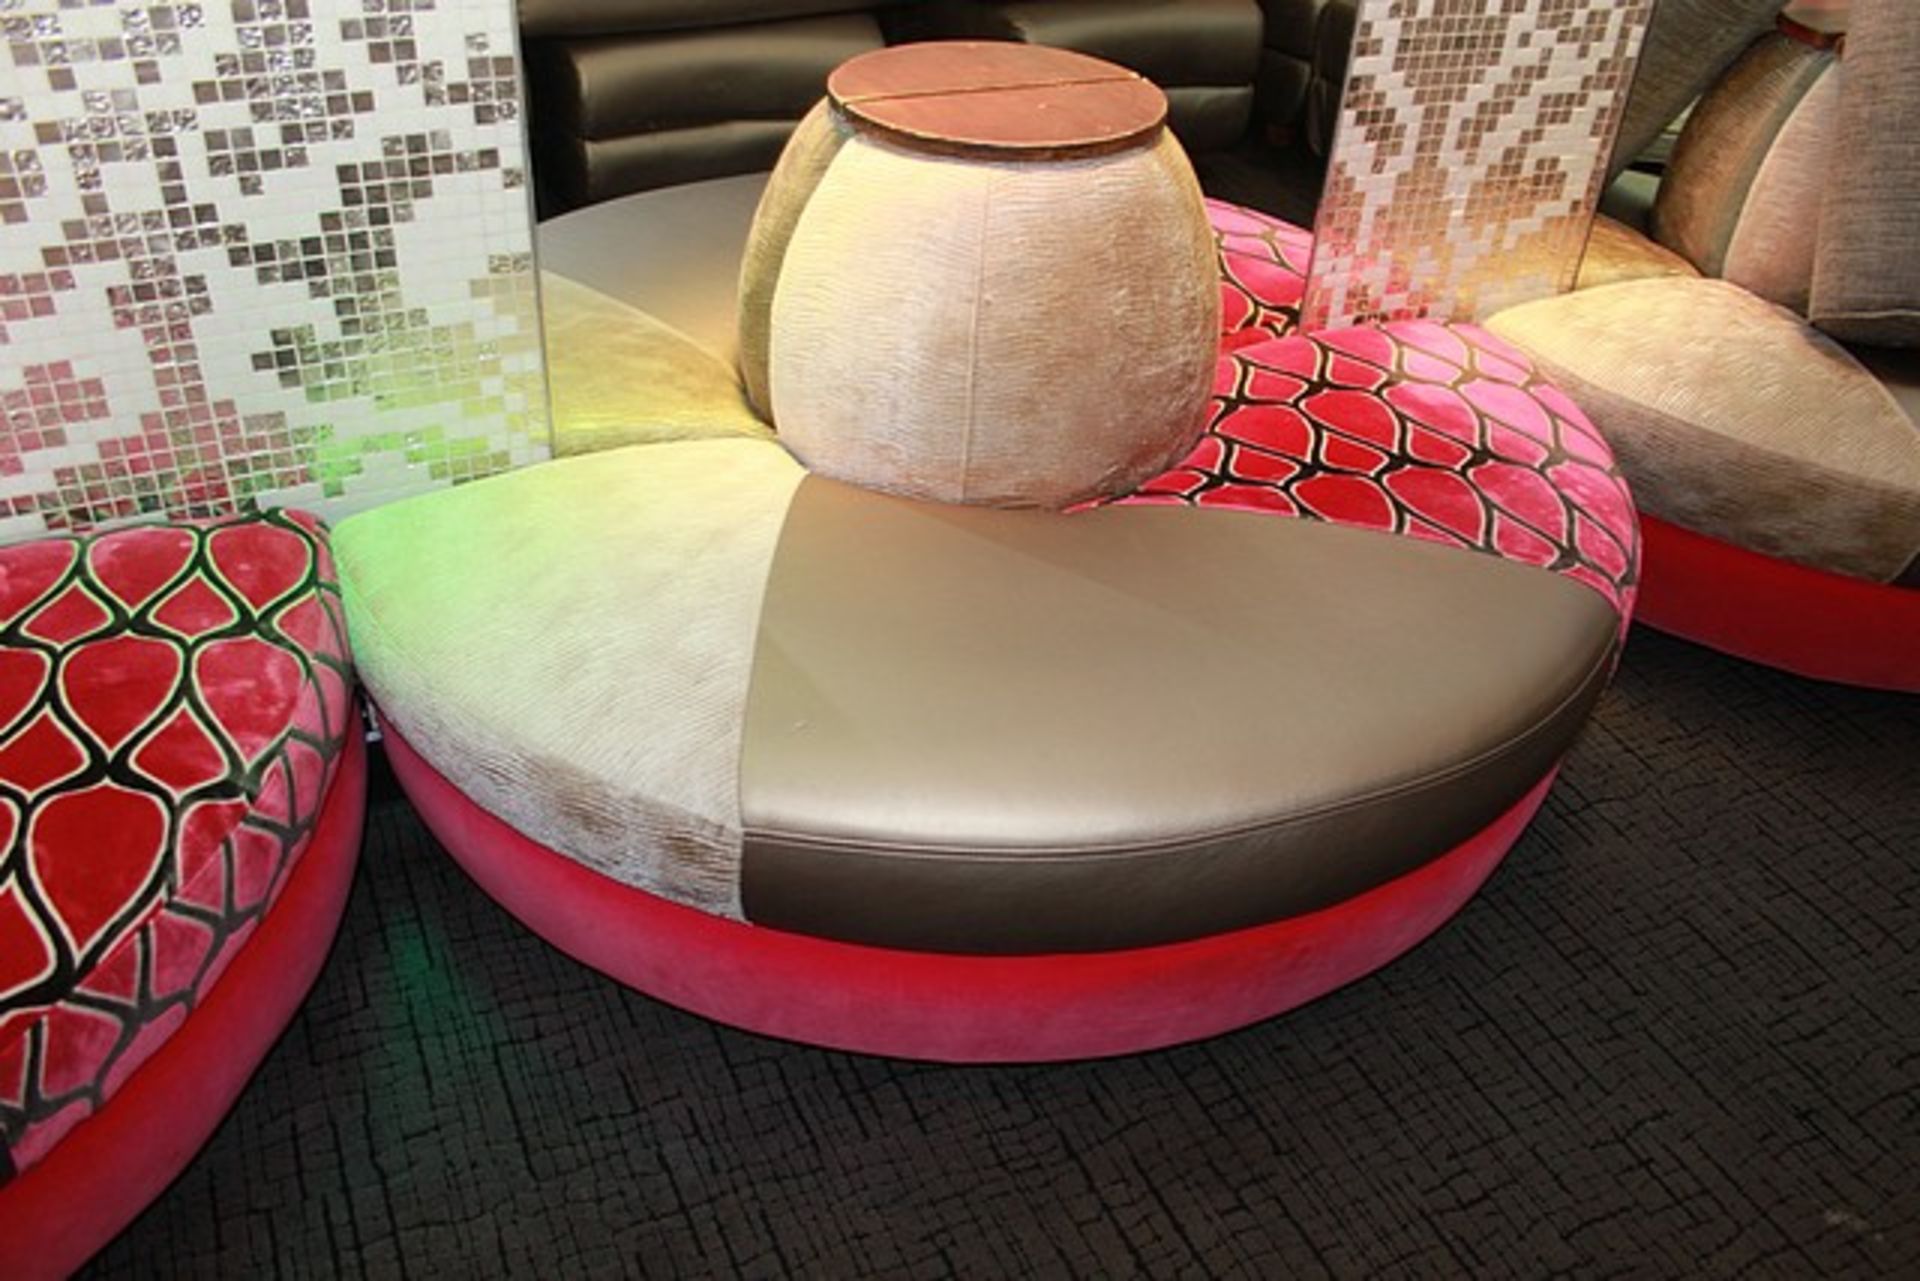 Banquet seating upholstered in pink curved sectional with large backrest section 700mm seat pitch